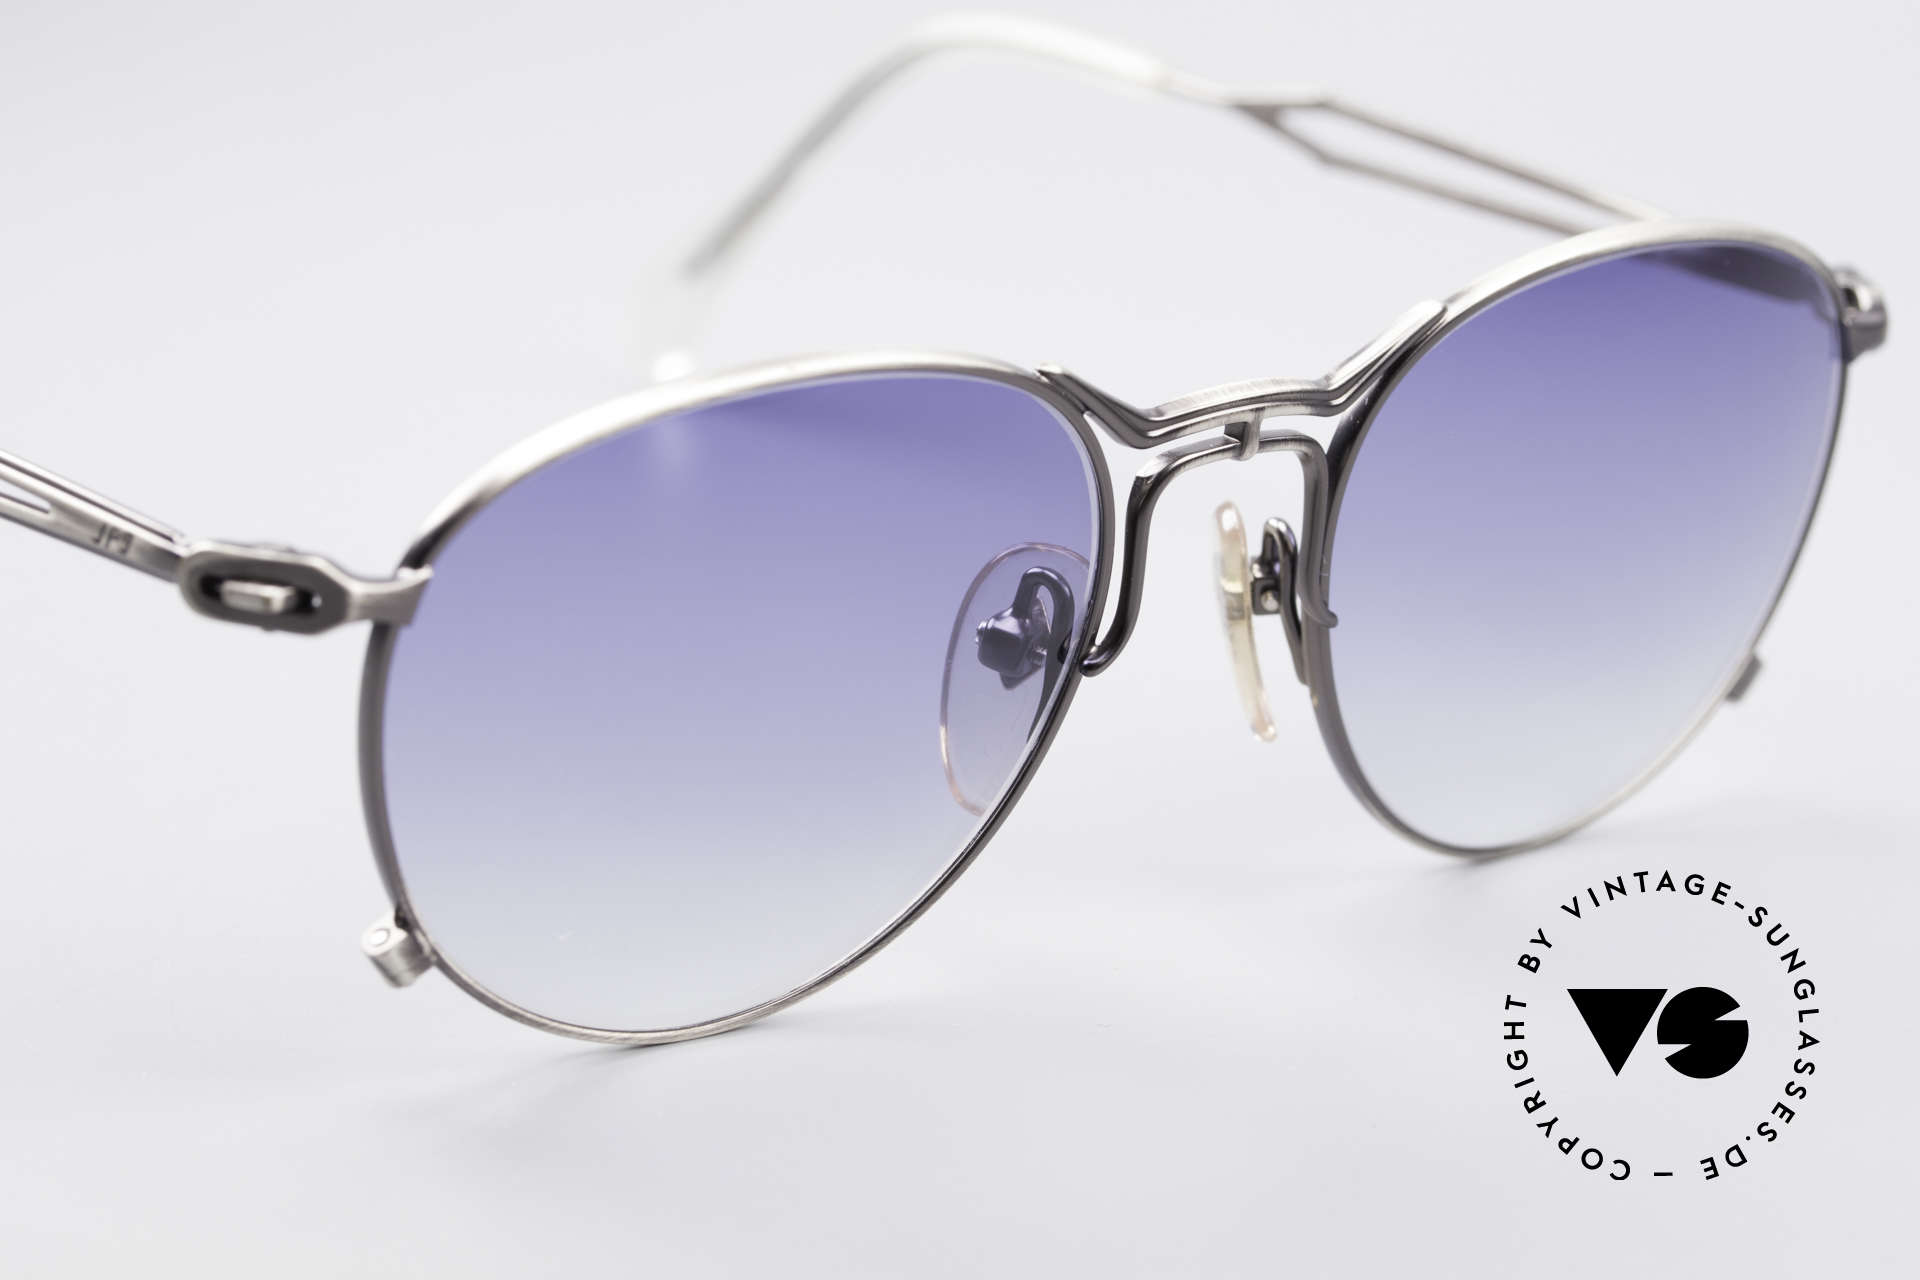 Jean Paul Gaultier 55-2177 Rare Designer Sunglasses, a real designer frame in top-notch quality from 1996, Made for Men and Women